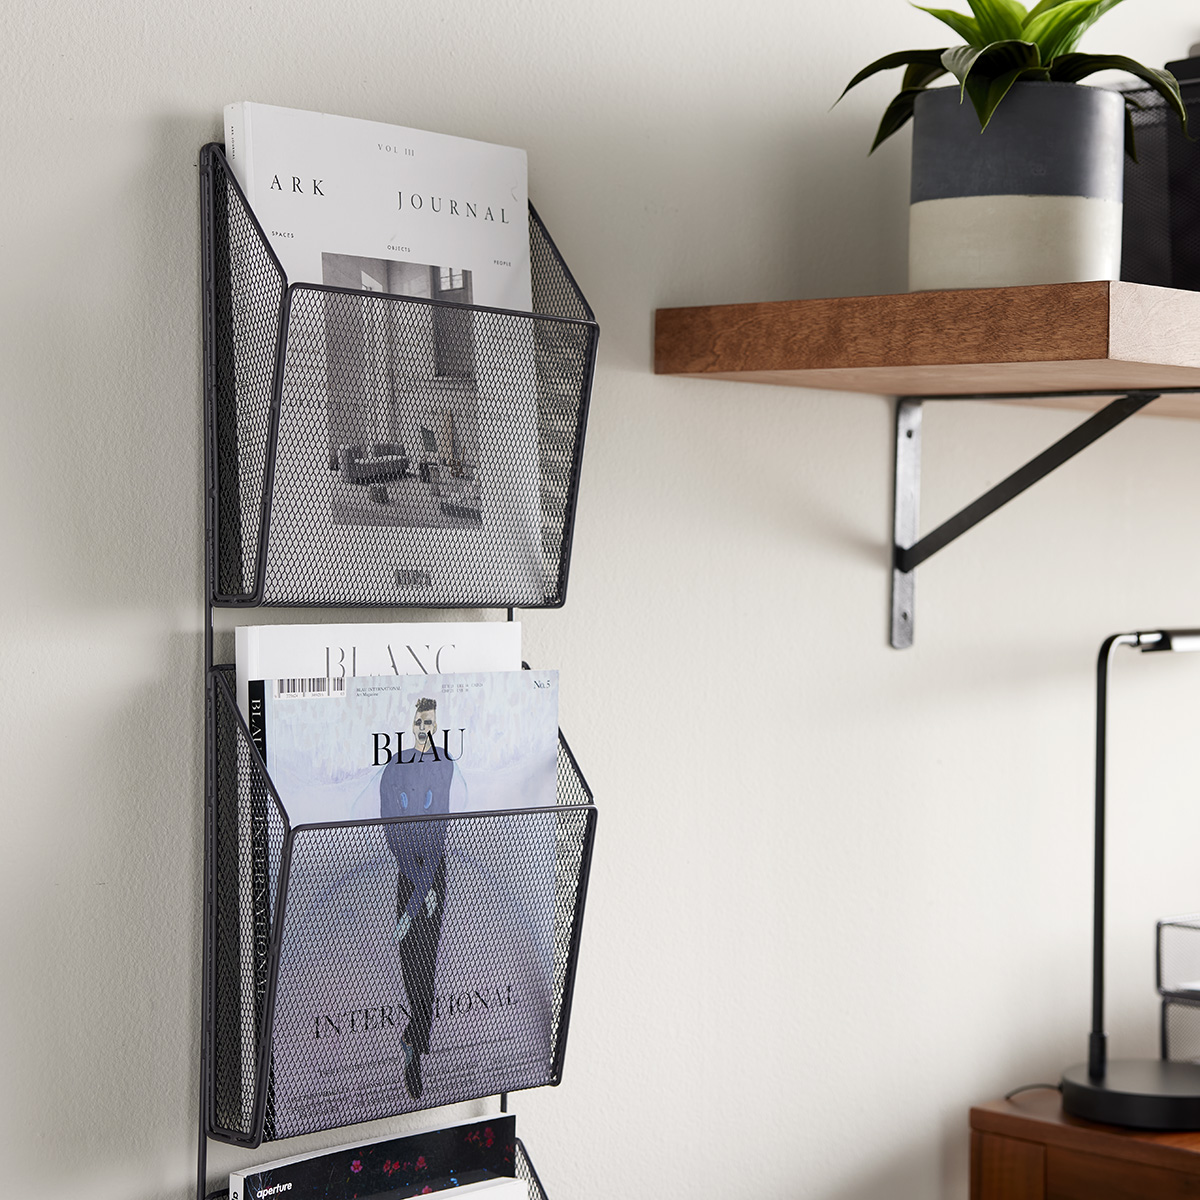 Graphite Mesh 3-Pocket Wall Organizer | The Container Store